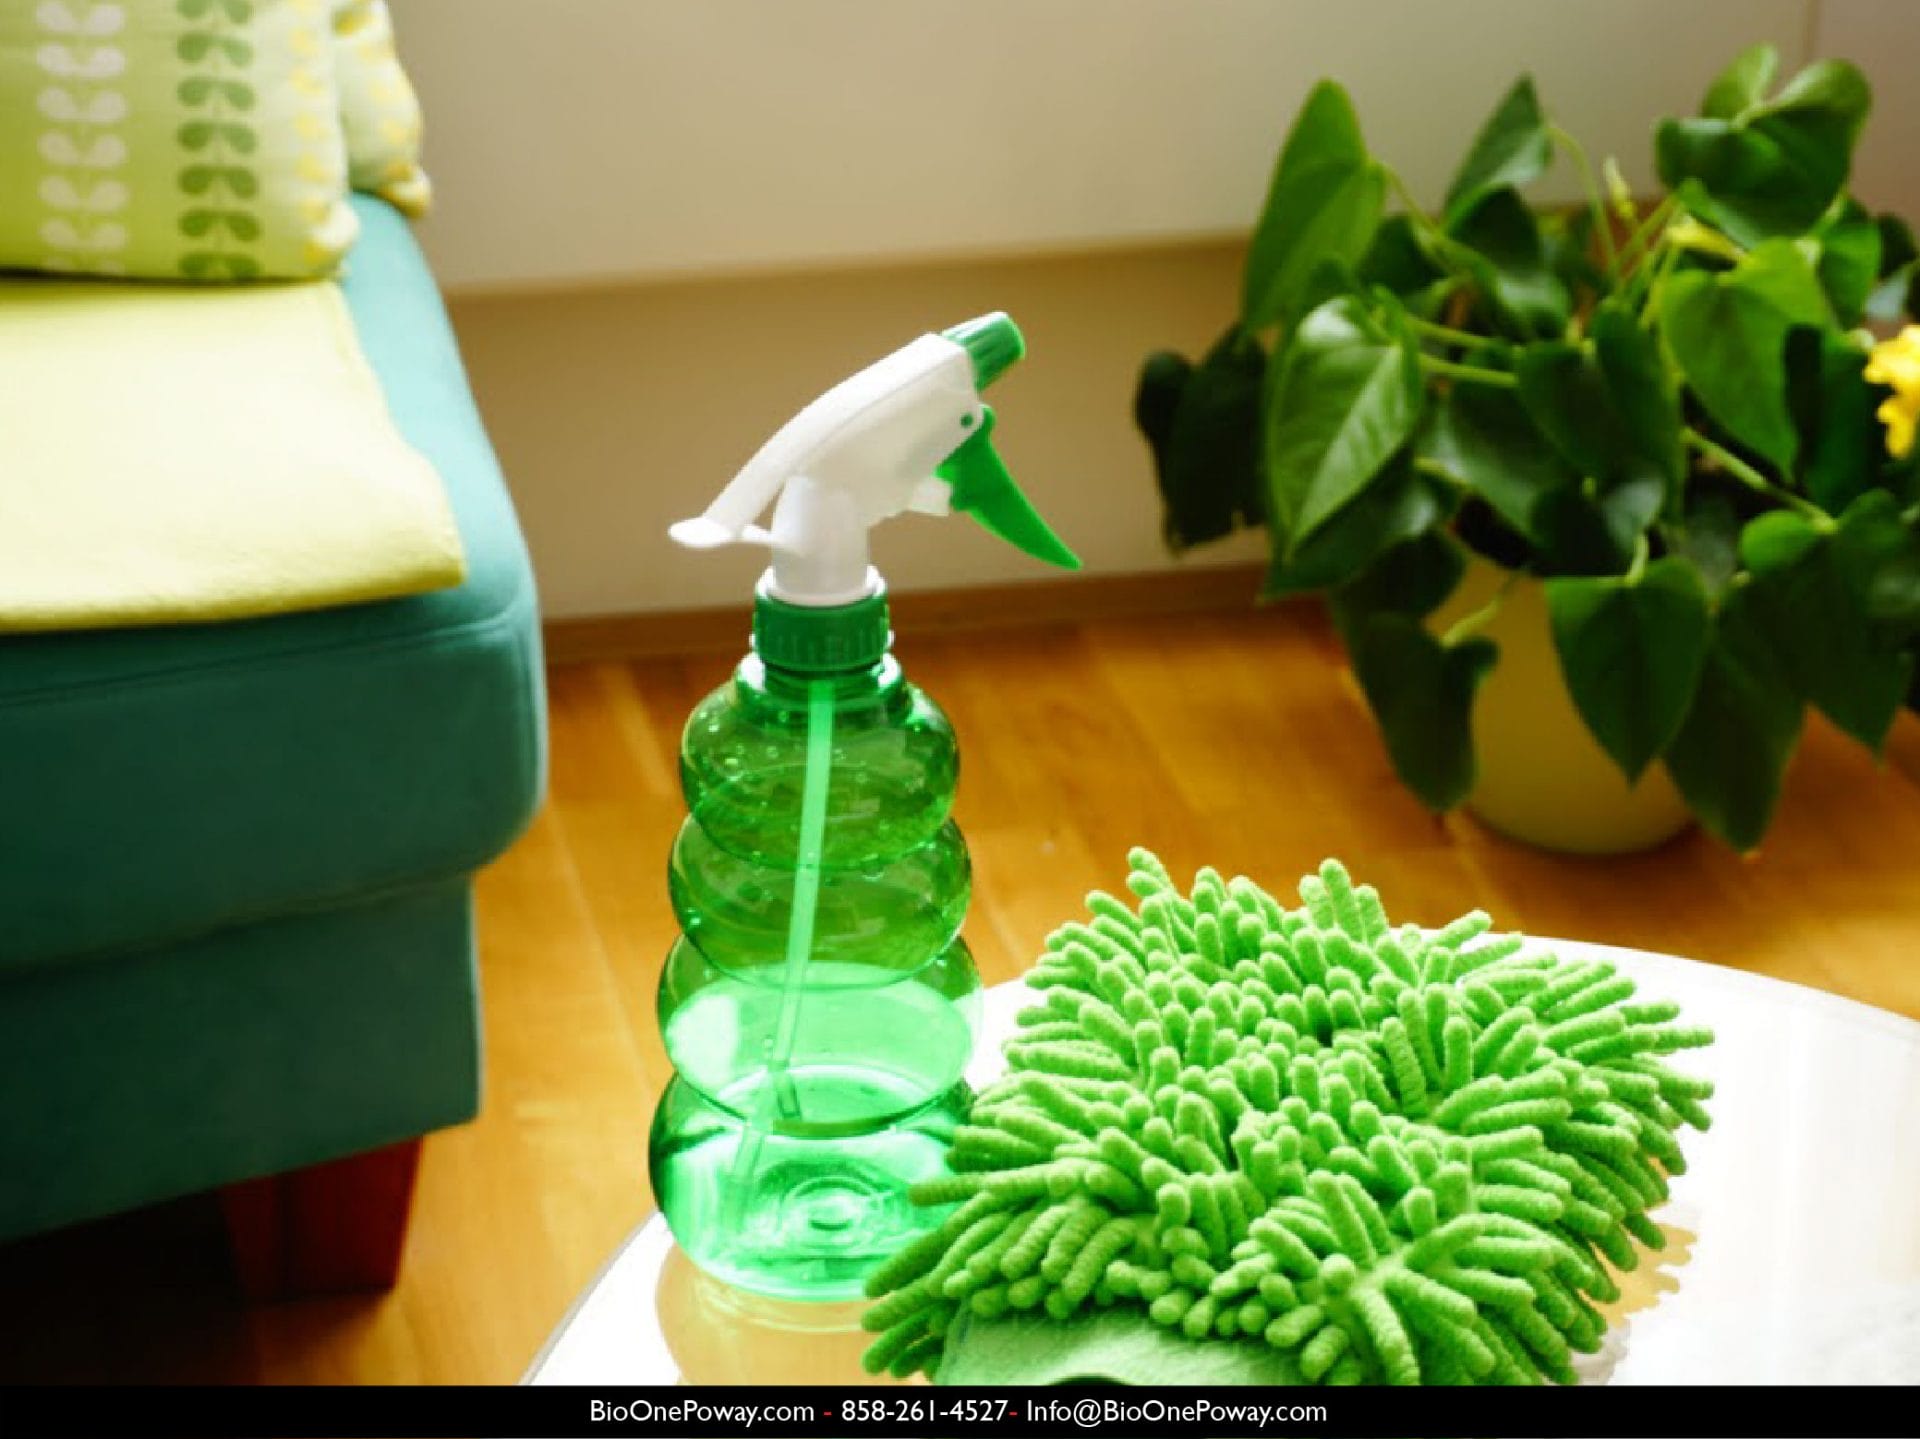 Image shows cleaning and disinfecting products.